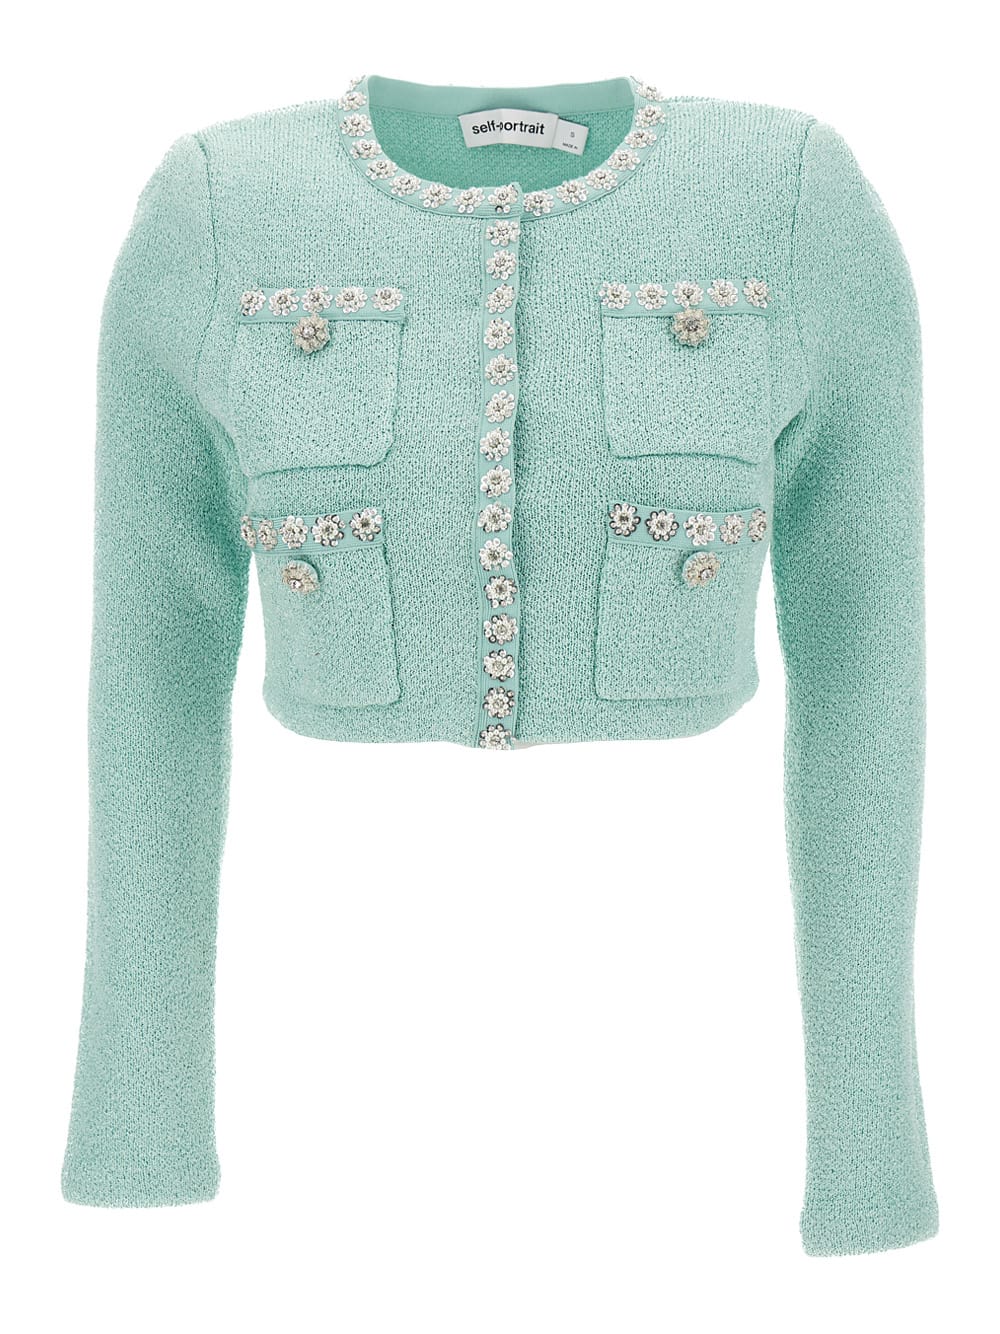 SELF-PORTRAIT LIGHT BLUE CROP JACKET WITH JEWEL BUTTONS IN KNIT WOMAN